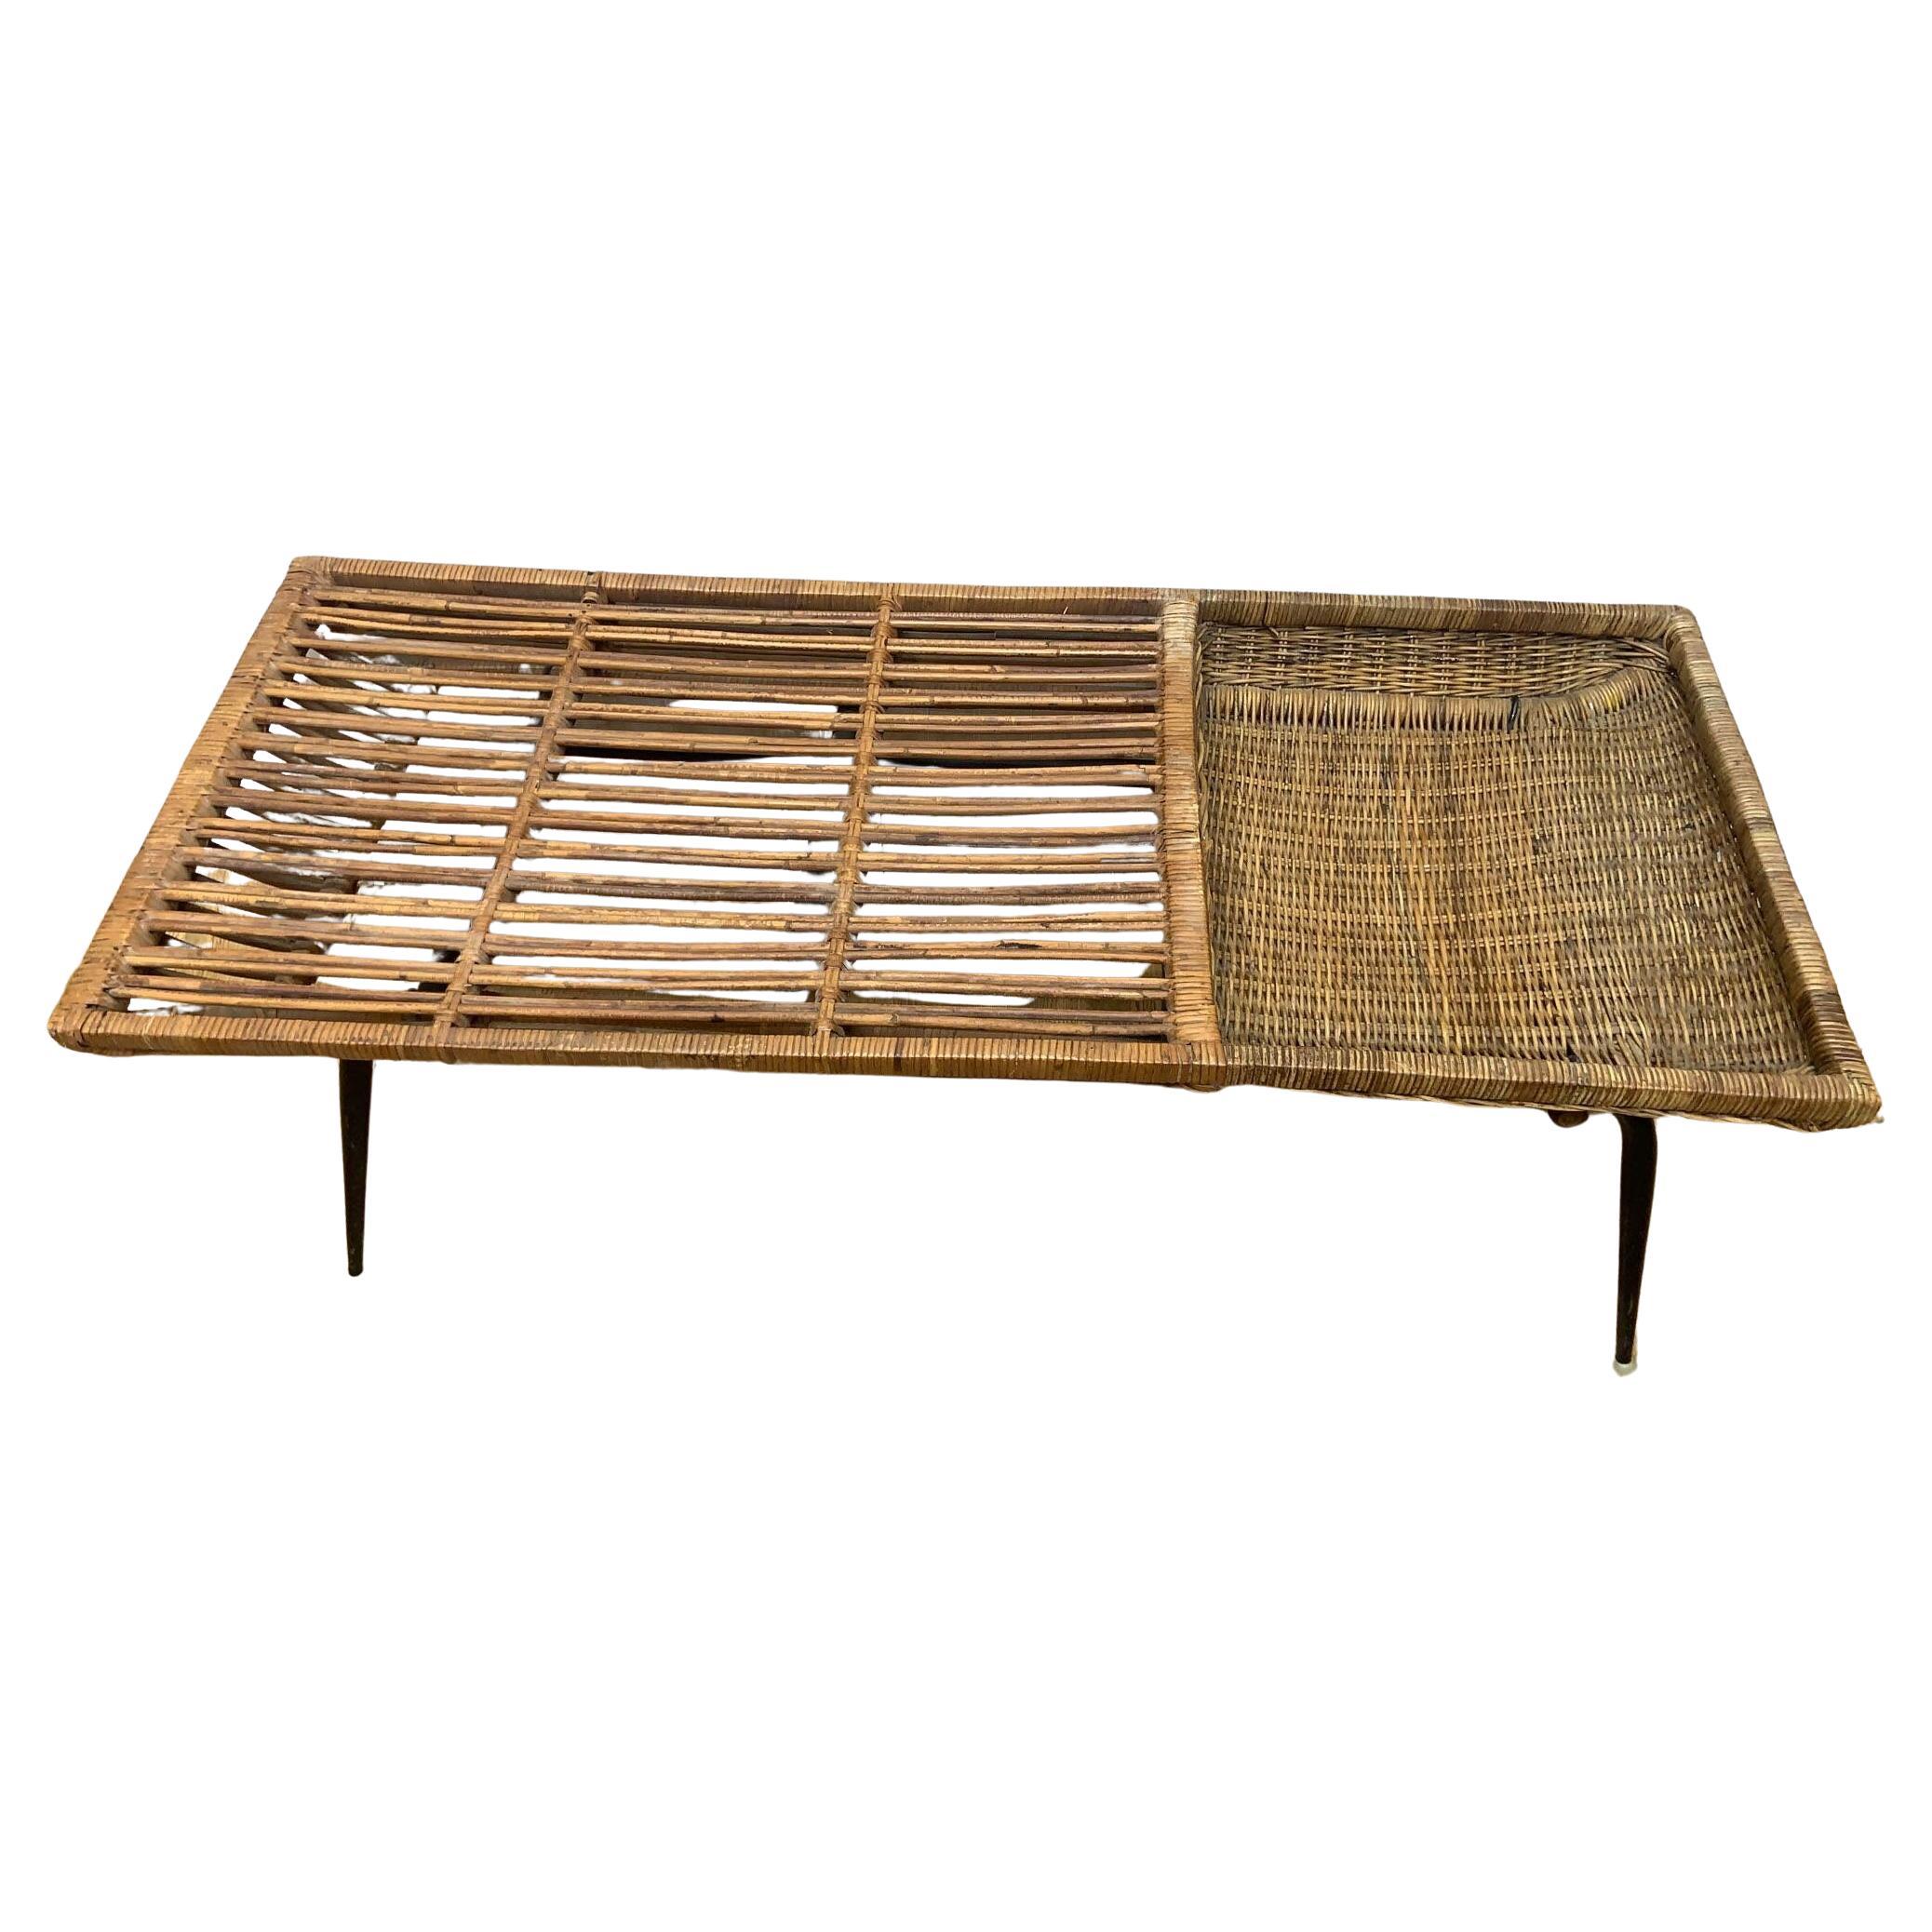 Vintage Modern Wicker Basket Cocktail Coffee Table by Troy Sunshade Co.

Vintage Modern Wicker Basket Cocktail Coffee Table by Troy Sunshade Co., a stunning addition to any living space. Crafted with a perfect blend of vintage rustic charm and